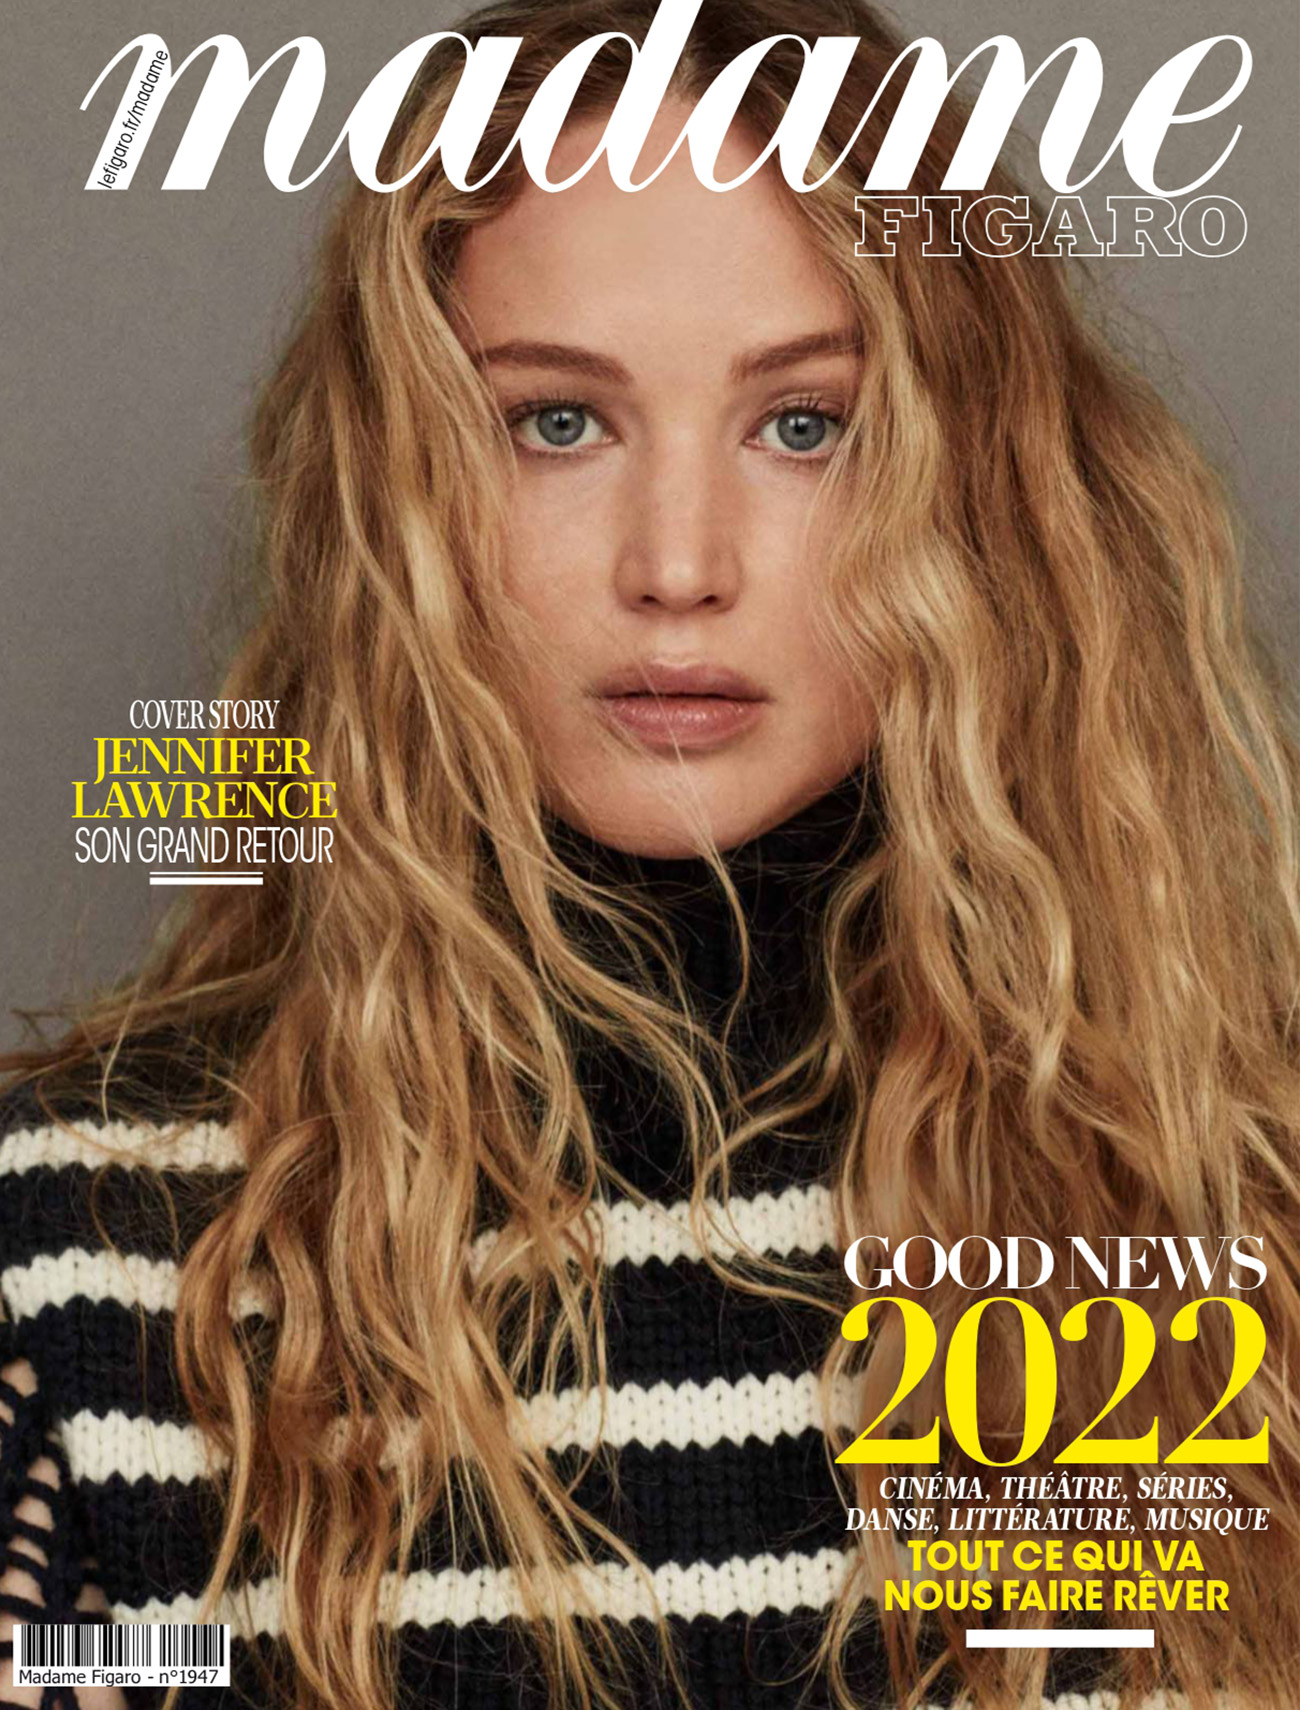 Jennifer Lawrence in Dior on Madame Figaro December 17th, 2021 cover by Daniel Jackson